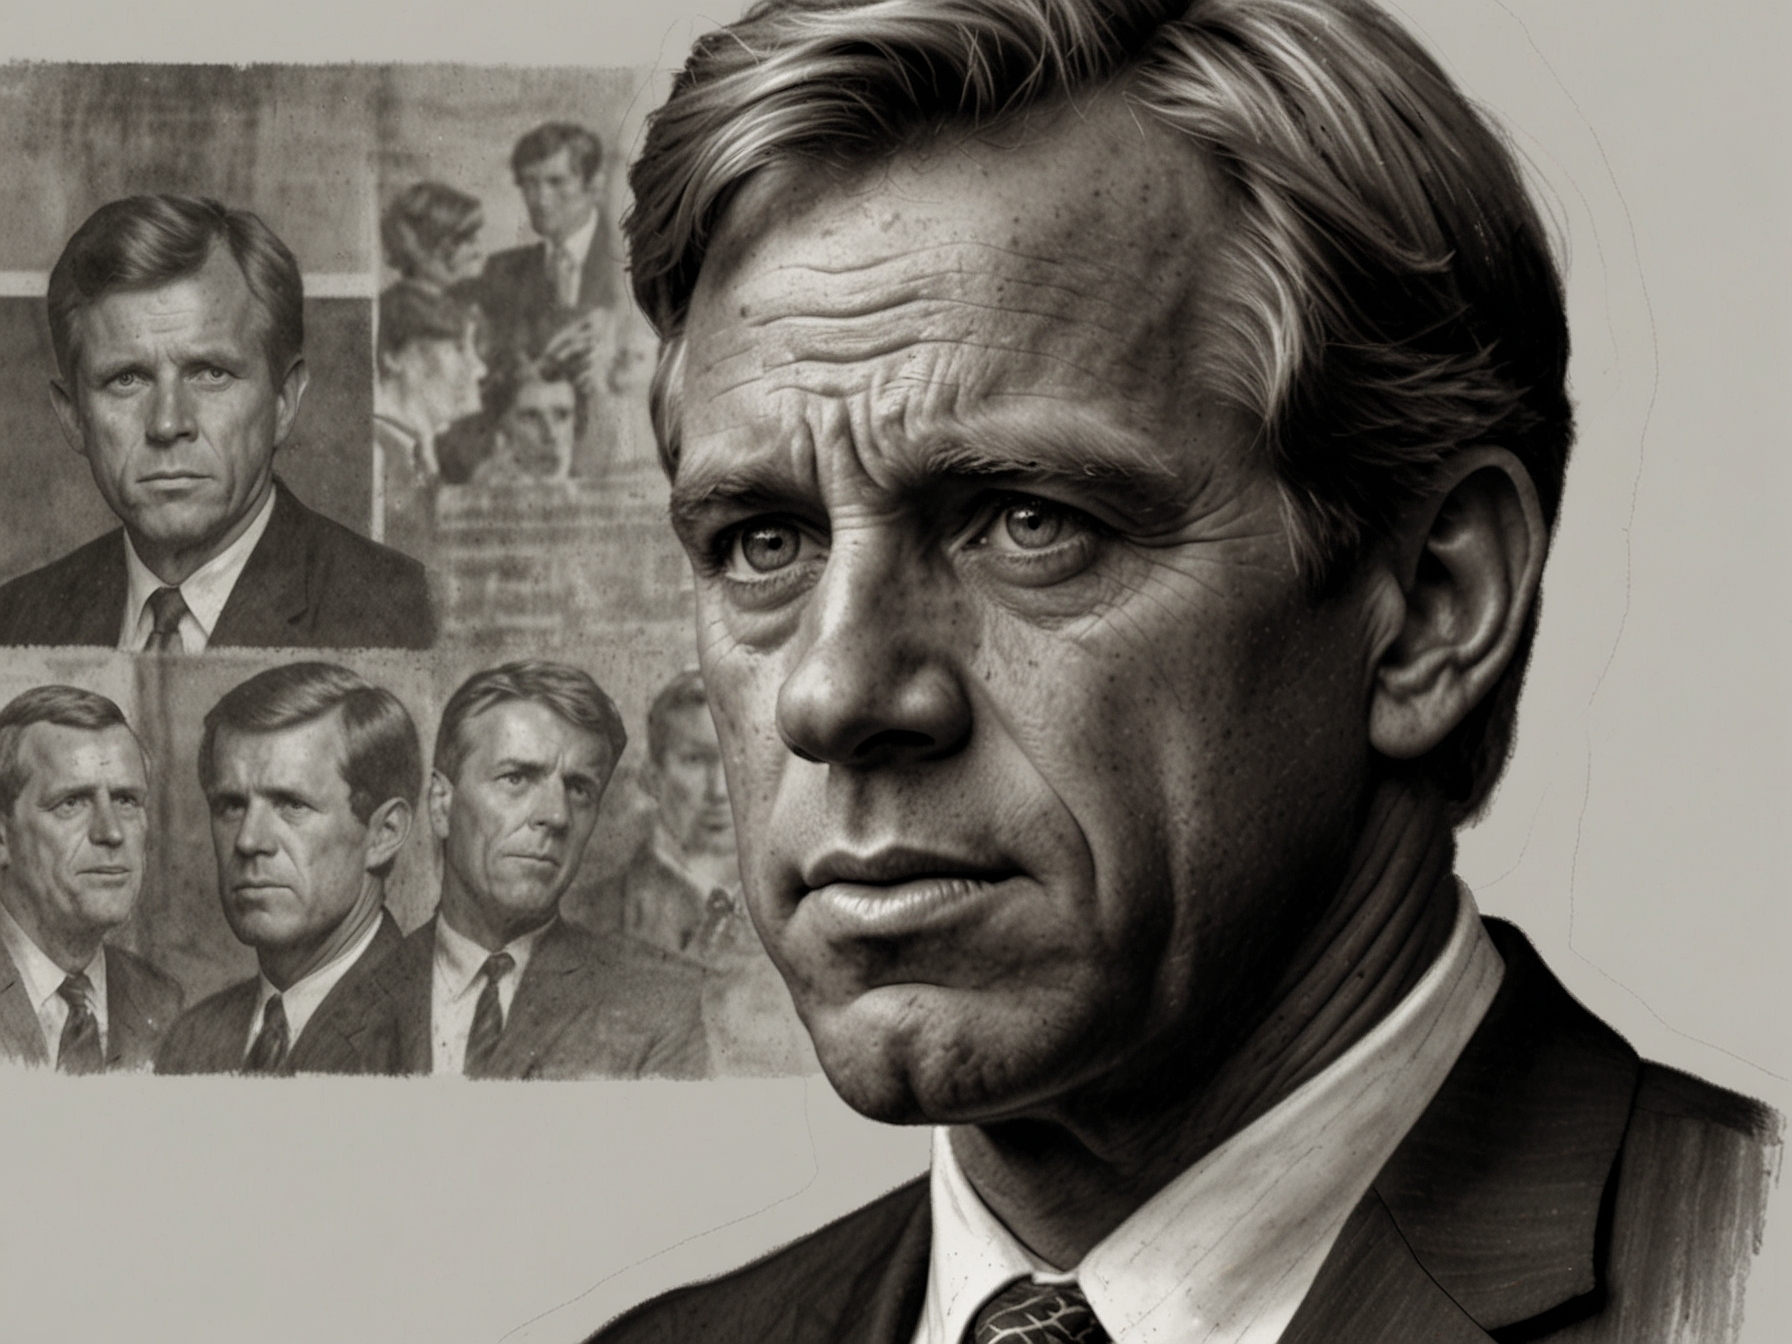 A depiction of Robert F. Kennedy Jr. looking determined, symbolizing his efforts and the challenges faced in political campaigning and qualifying for high-profile debates.